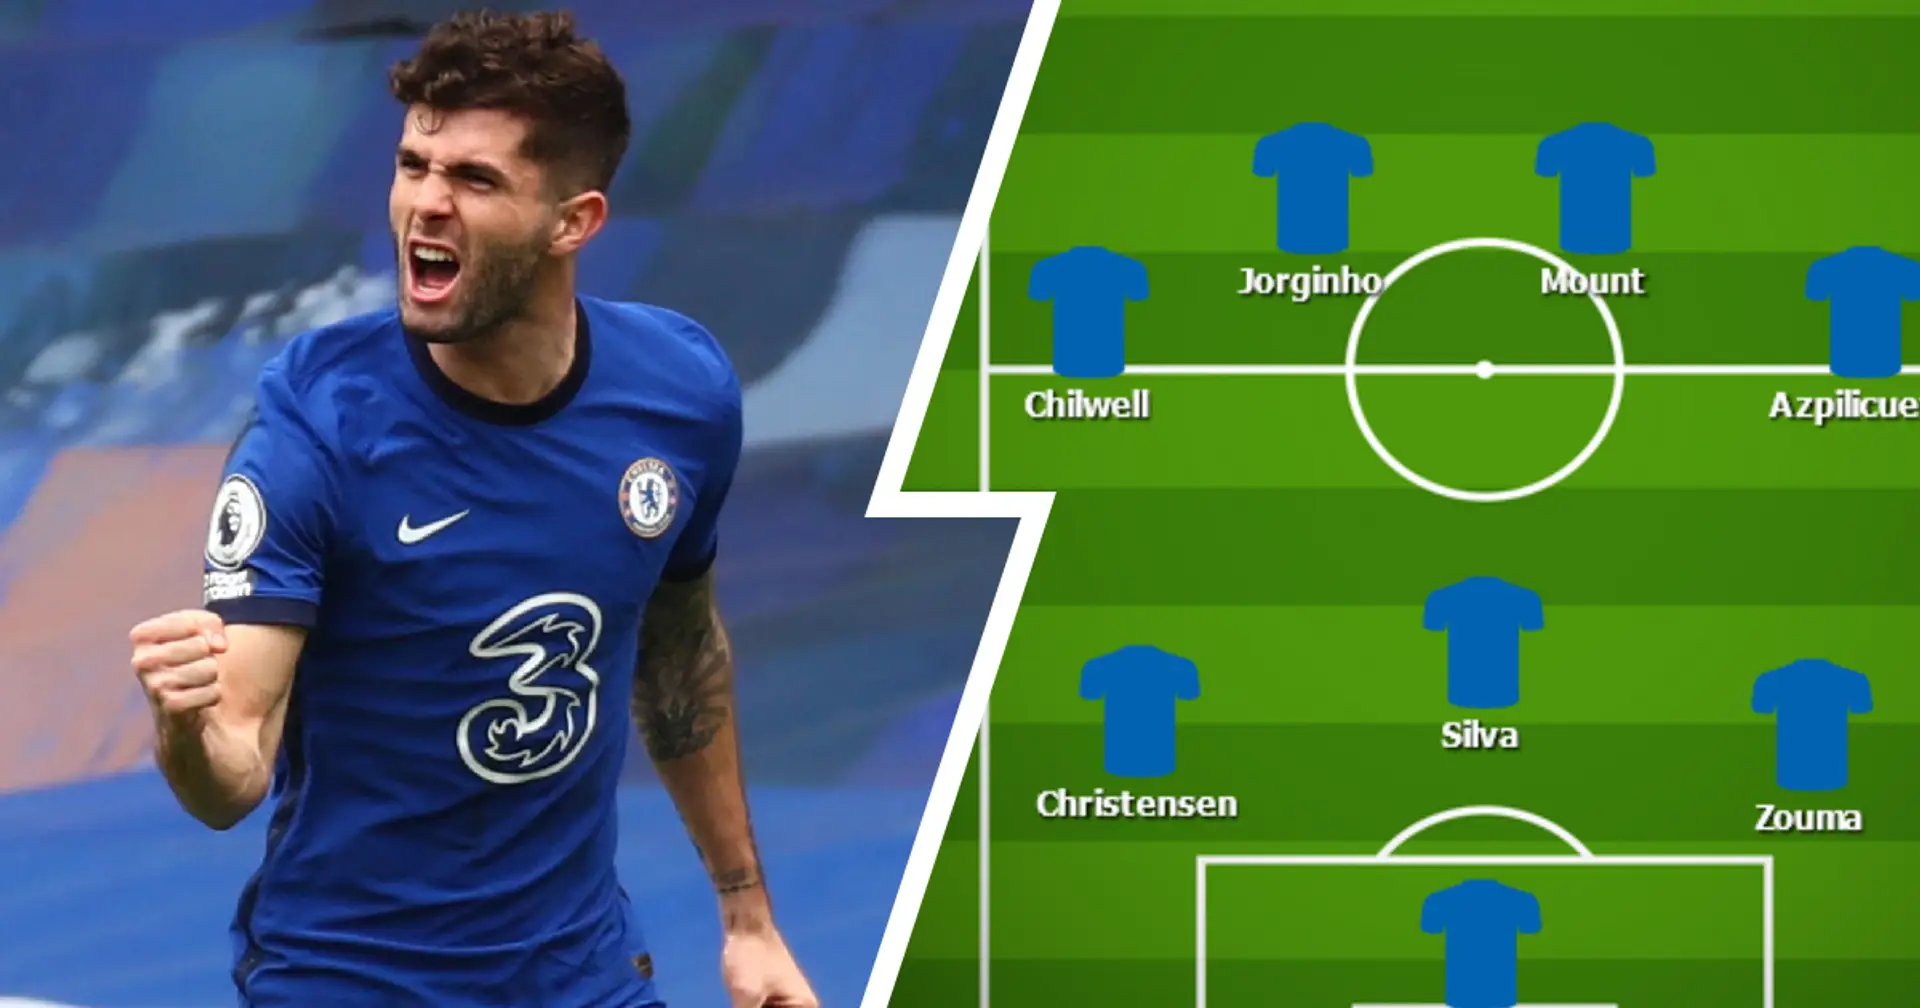 Chelsea's likely XI vs Real Madrid's likely XI: Where will the game be won and lost?